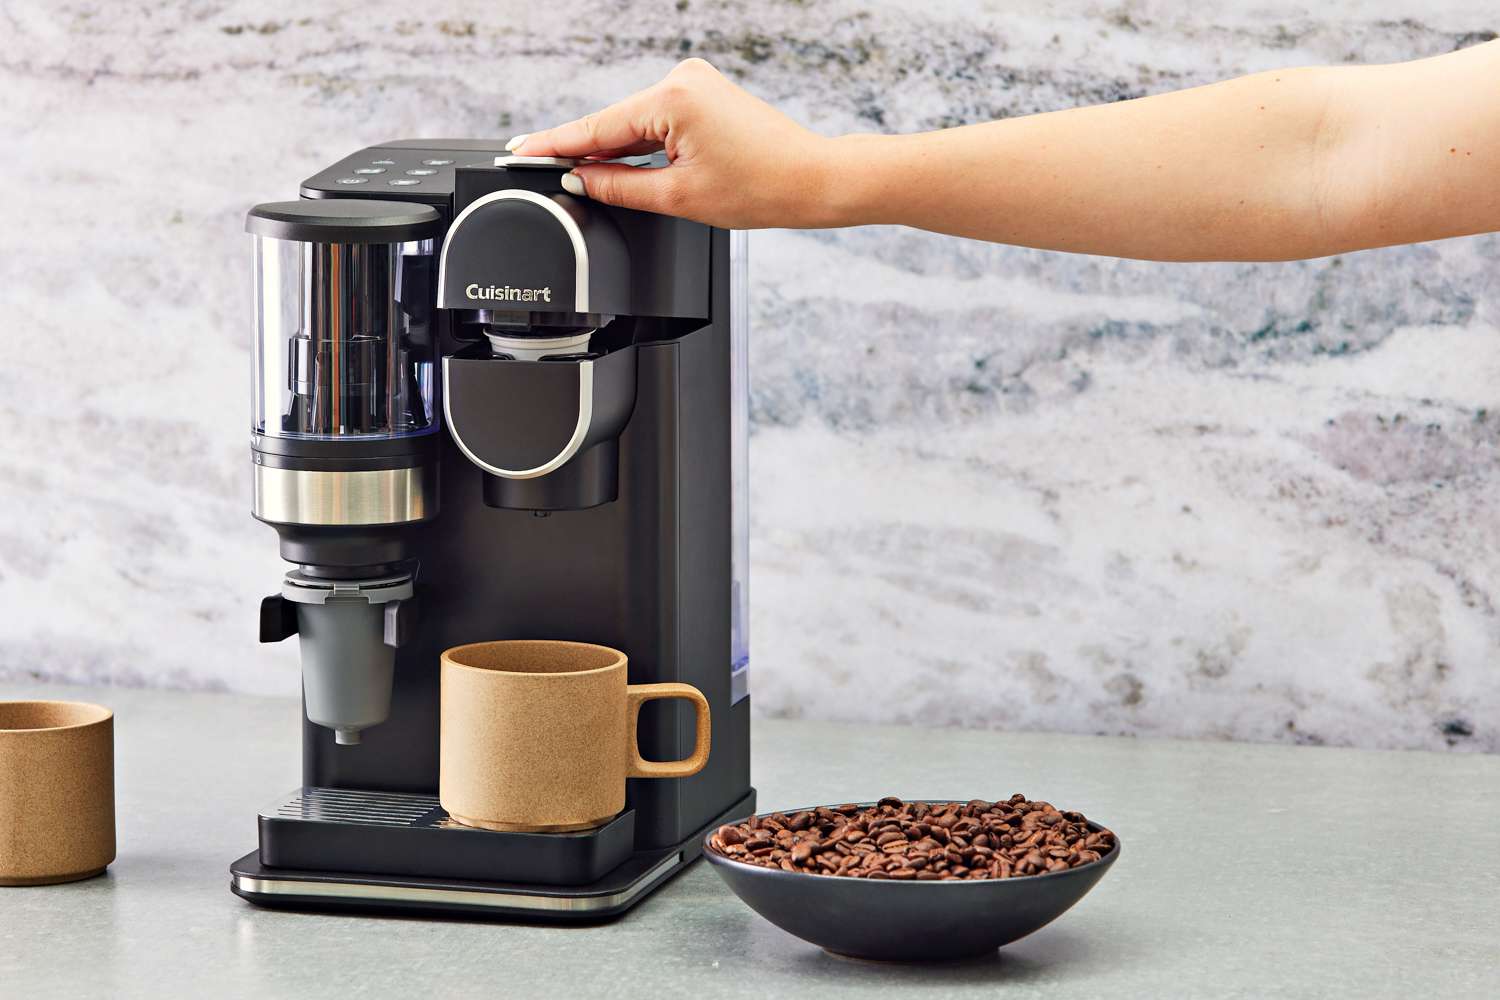 Dual Brew Coffee Maker Programmable Coffee Machine and Single Serve Brewer  with Glass Carafe for K Cup Pod and Ground Coffee Drip Coffee Maker with  Self Cleaning Function and 60oz Water 